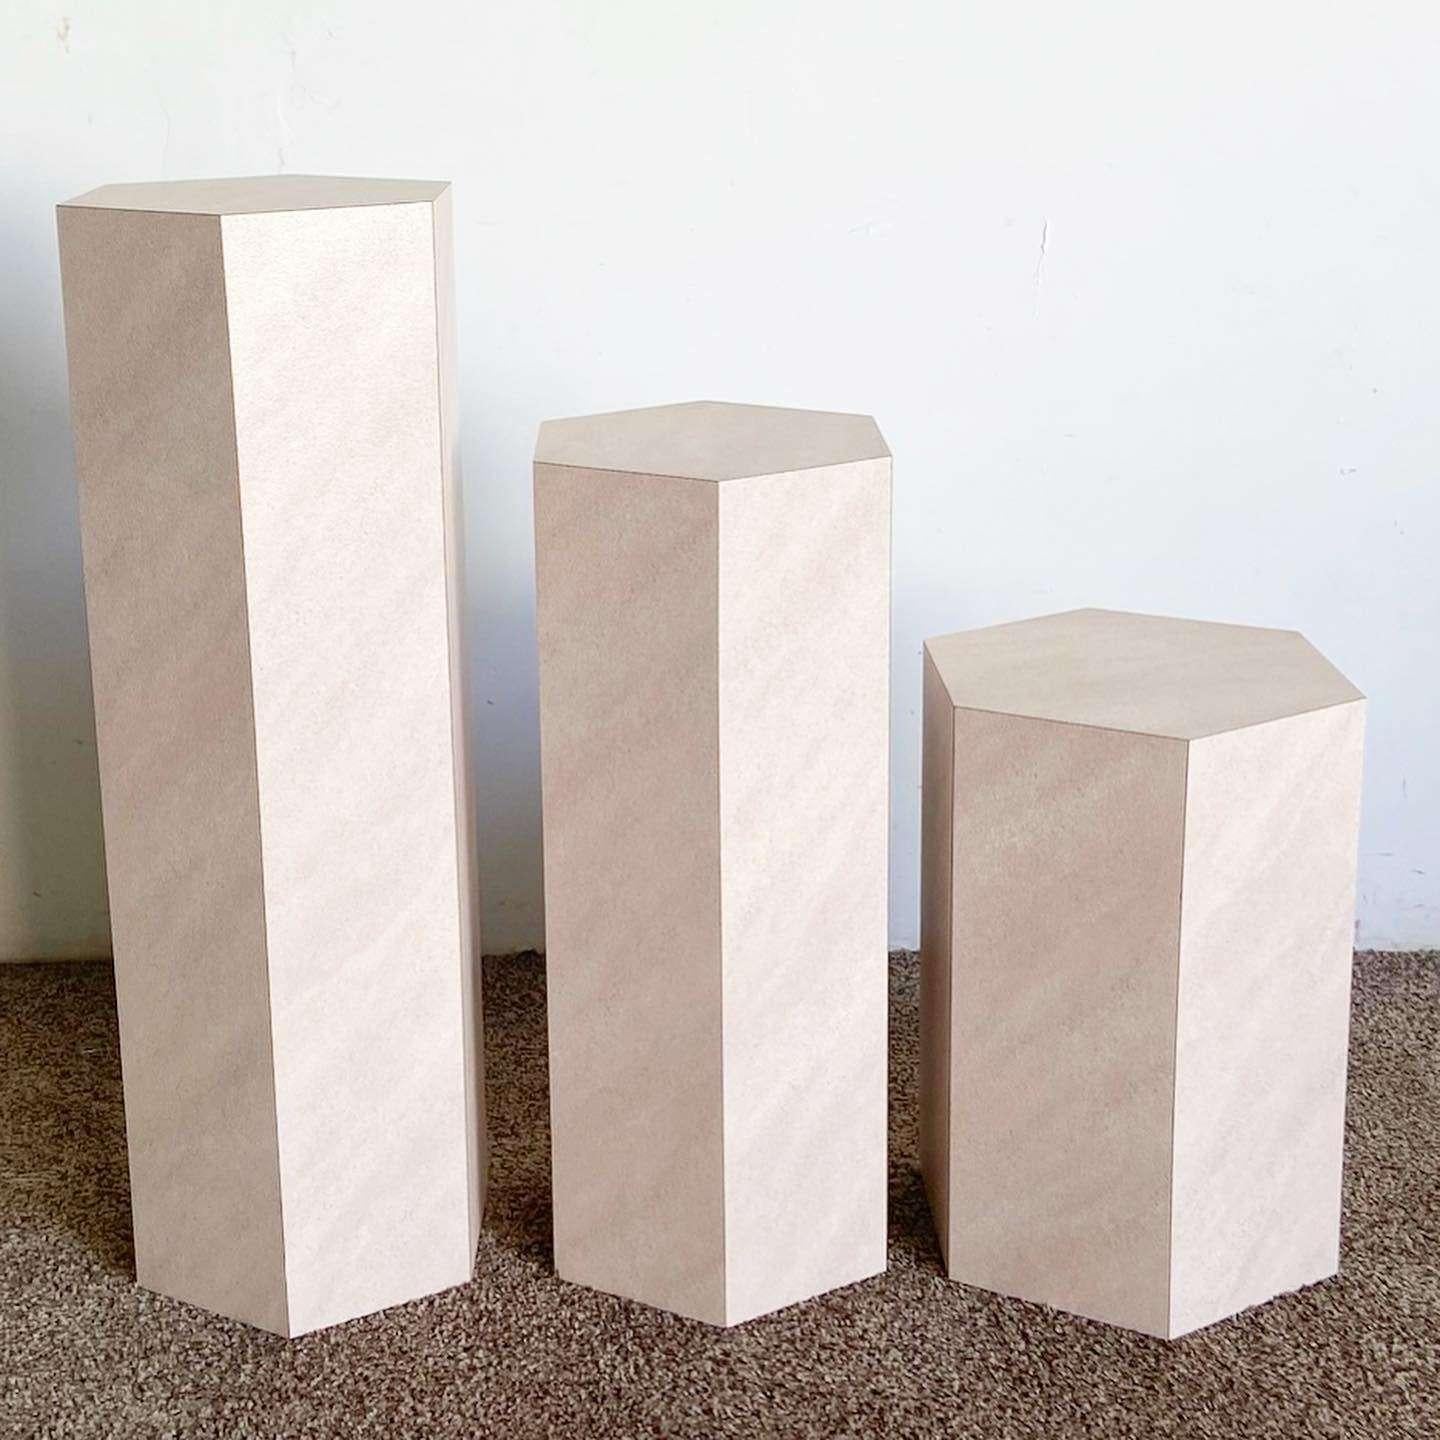 Late 20th Century Postmodern Lavender Textured Laminate Hexagonal Nesting Side Tables/Pedestals For Sale